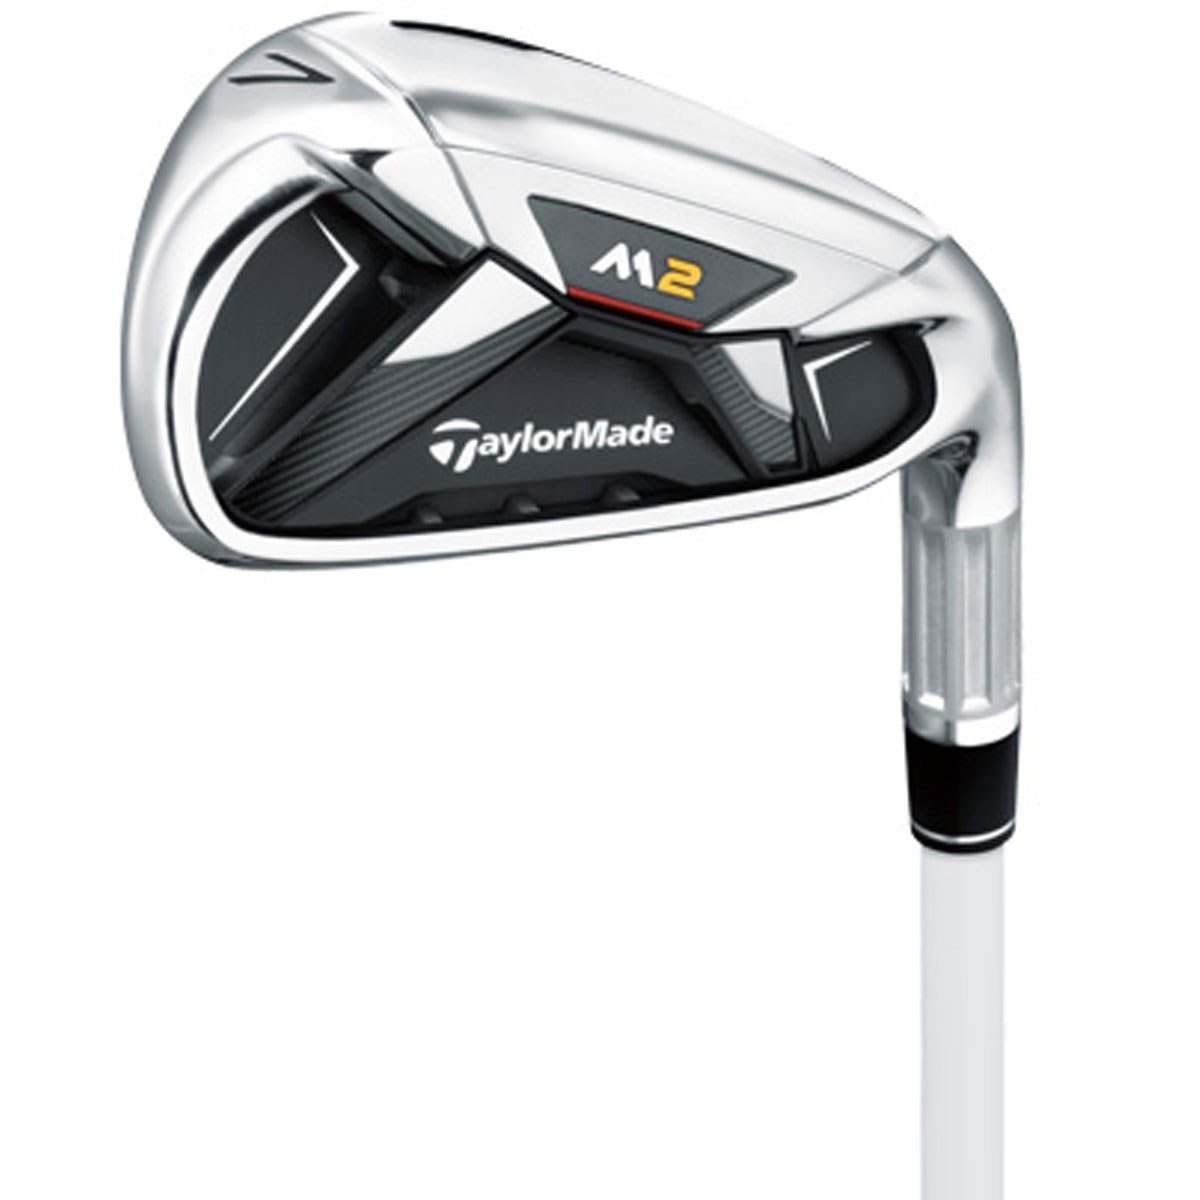 TaylorMade Ｍ２レディースアイアン5本セット